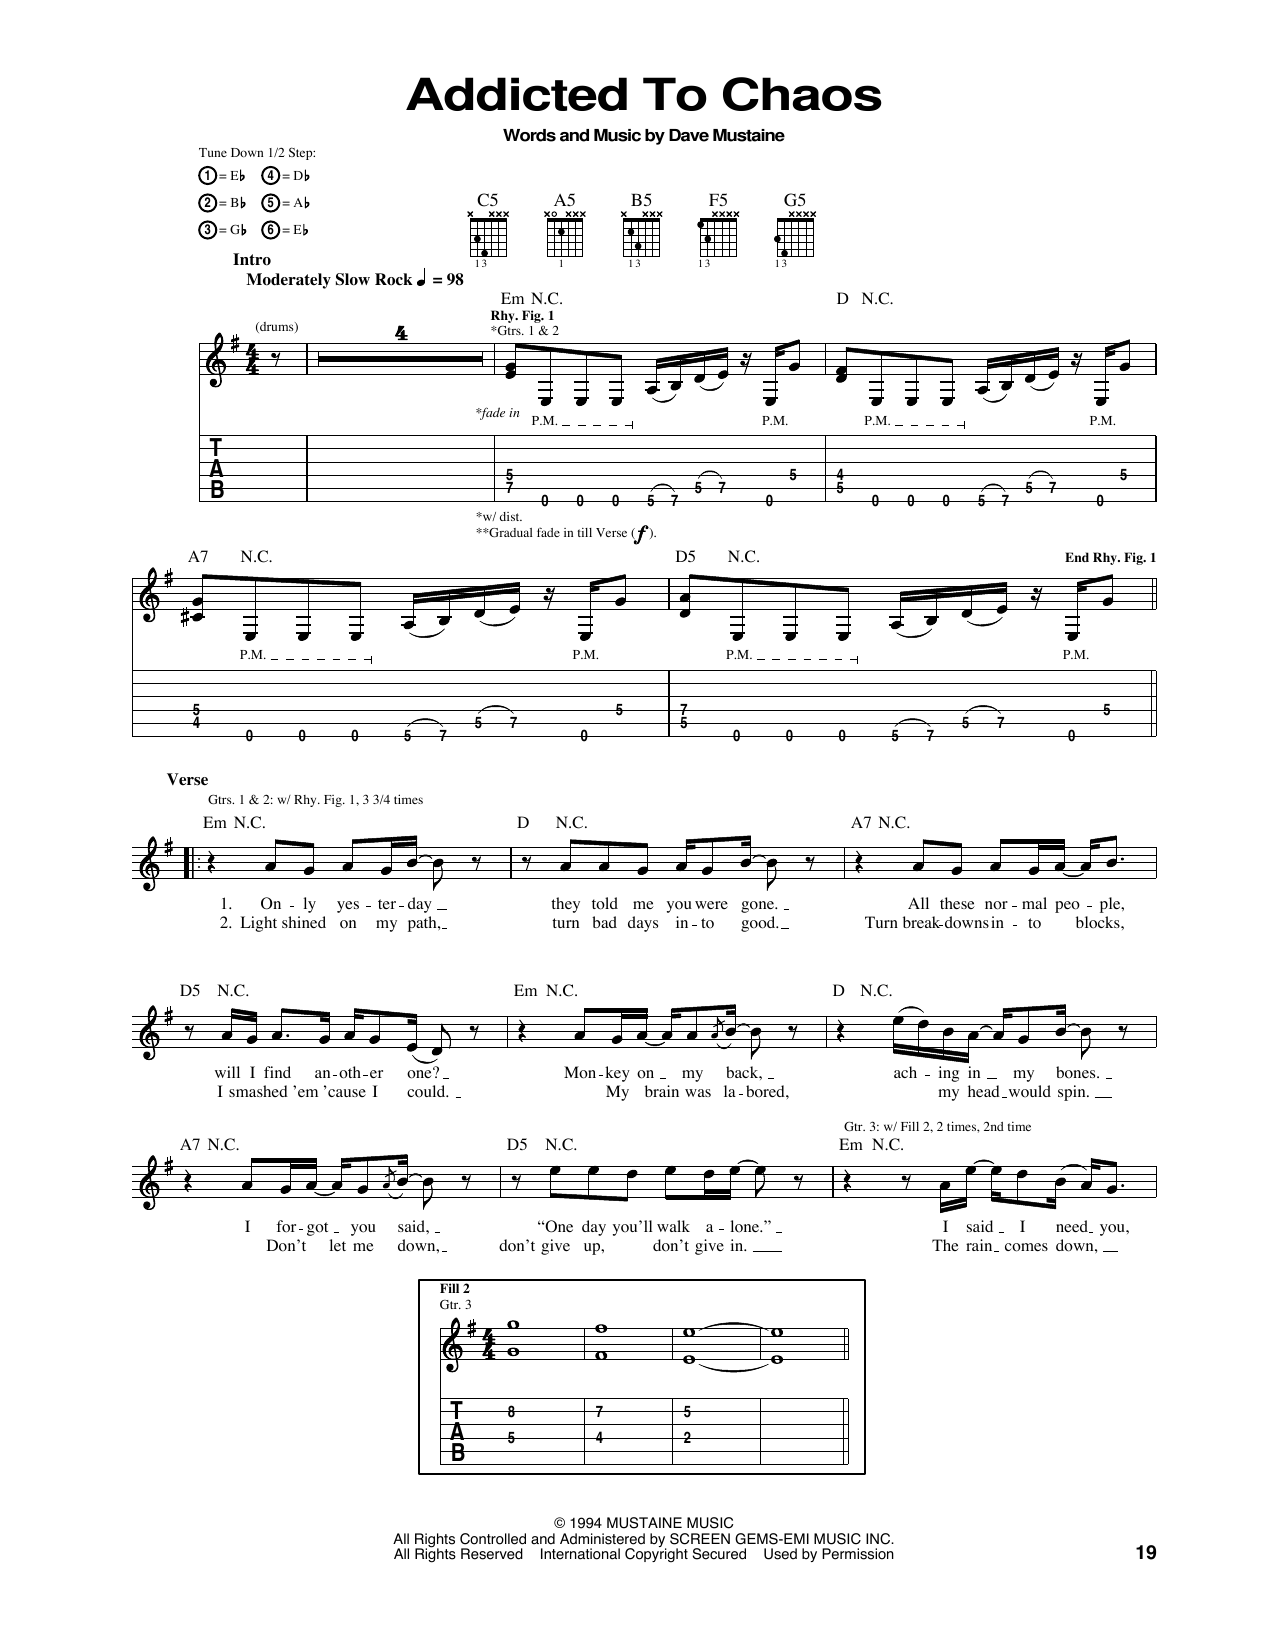 Download Megadeth Addicted To Chaos Sheet Music